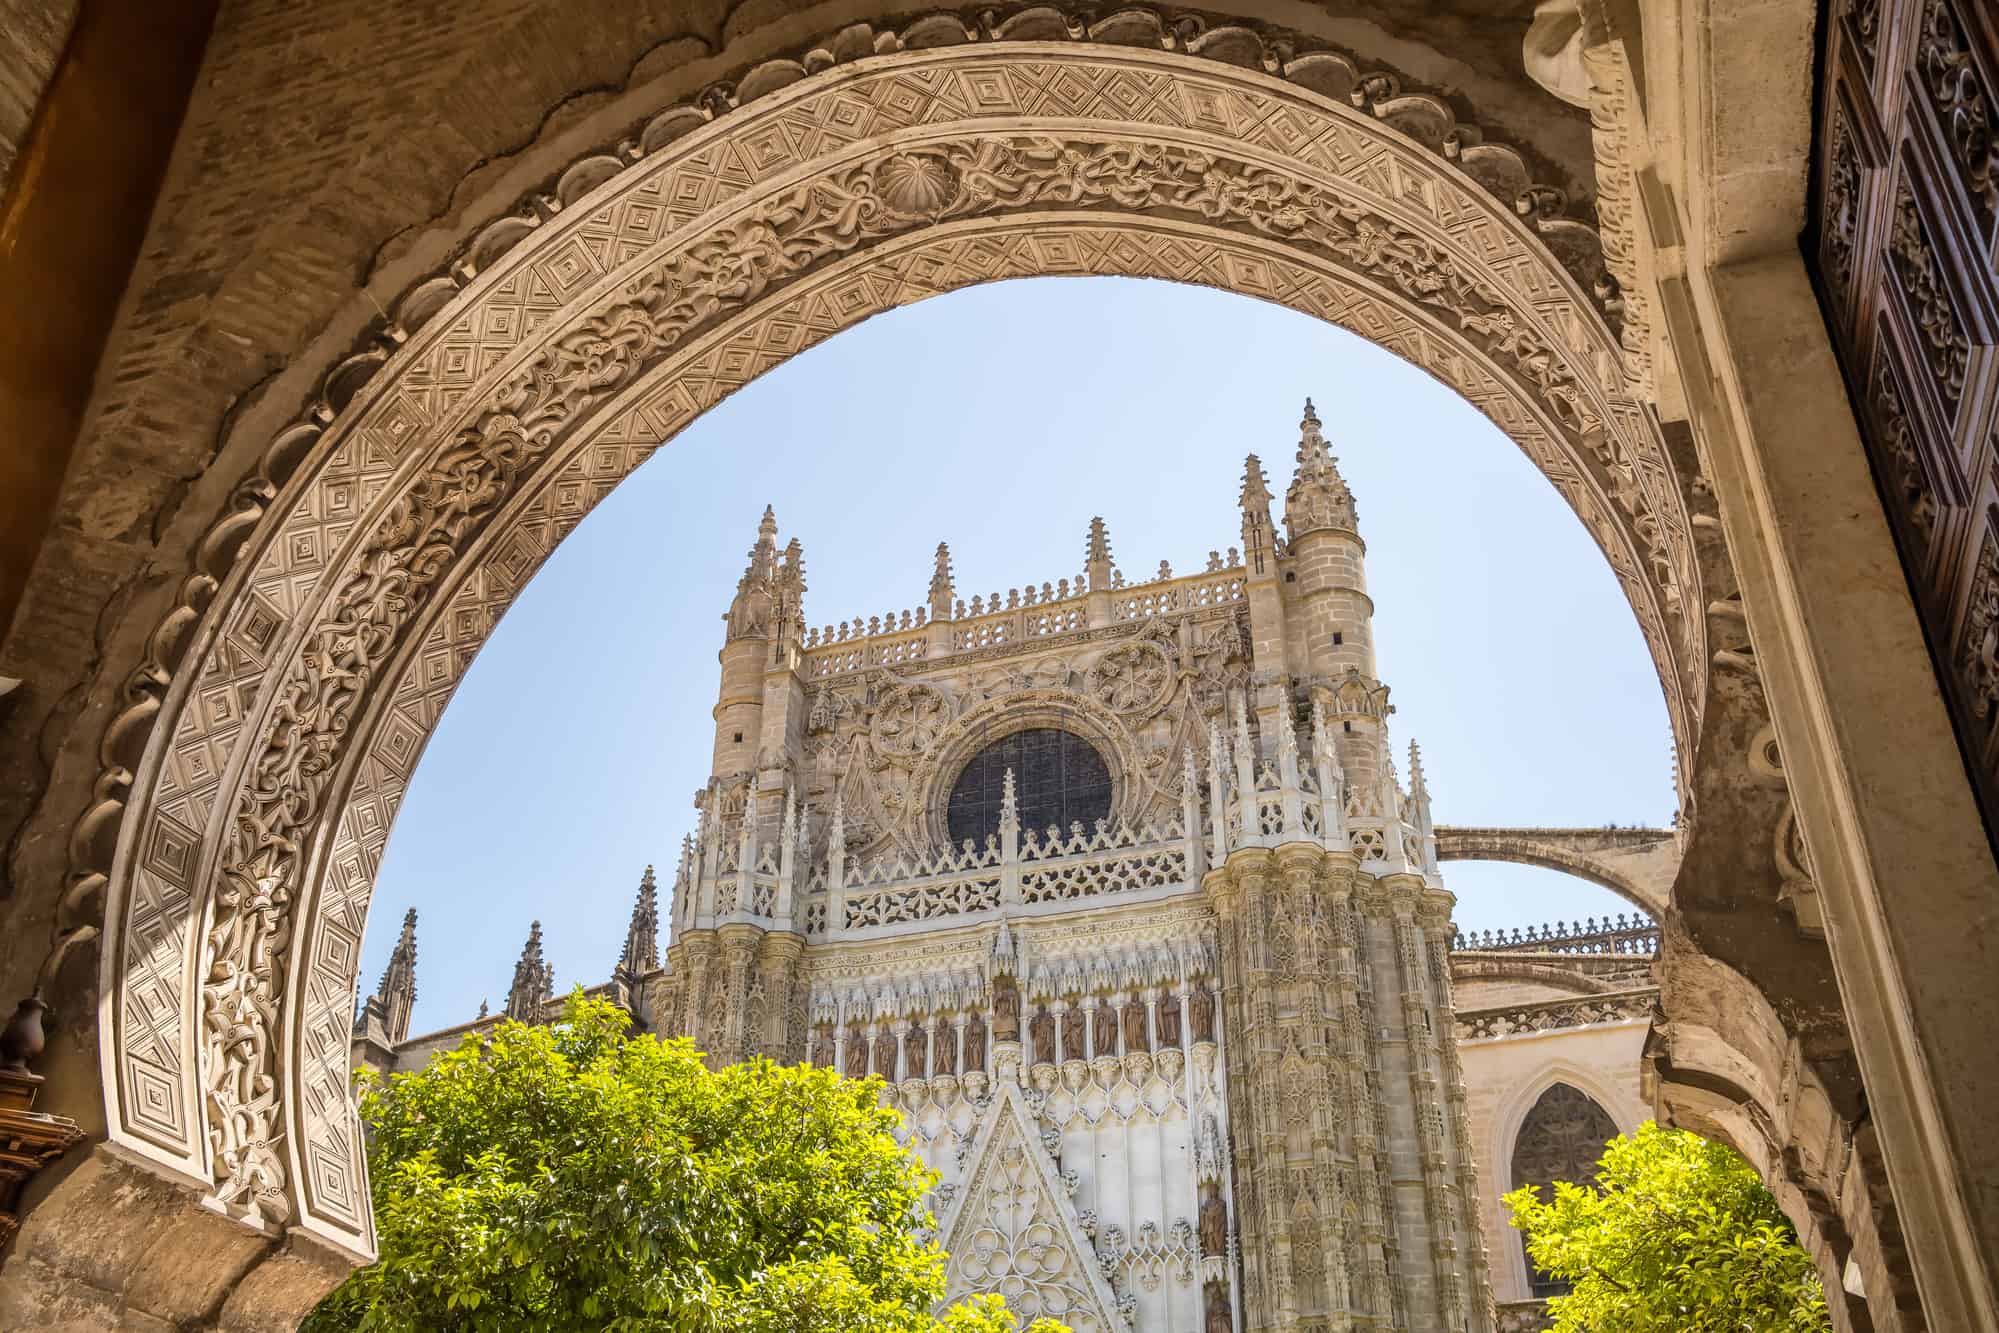 Cathedral of Seville seen through the carved arch in Sevilla, Andalucia, Spain